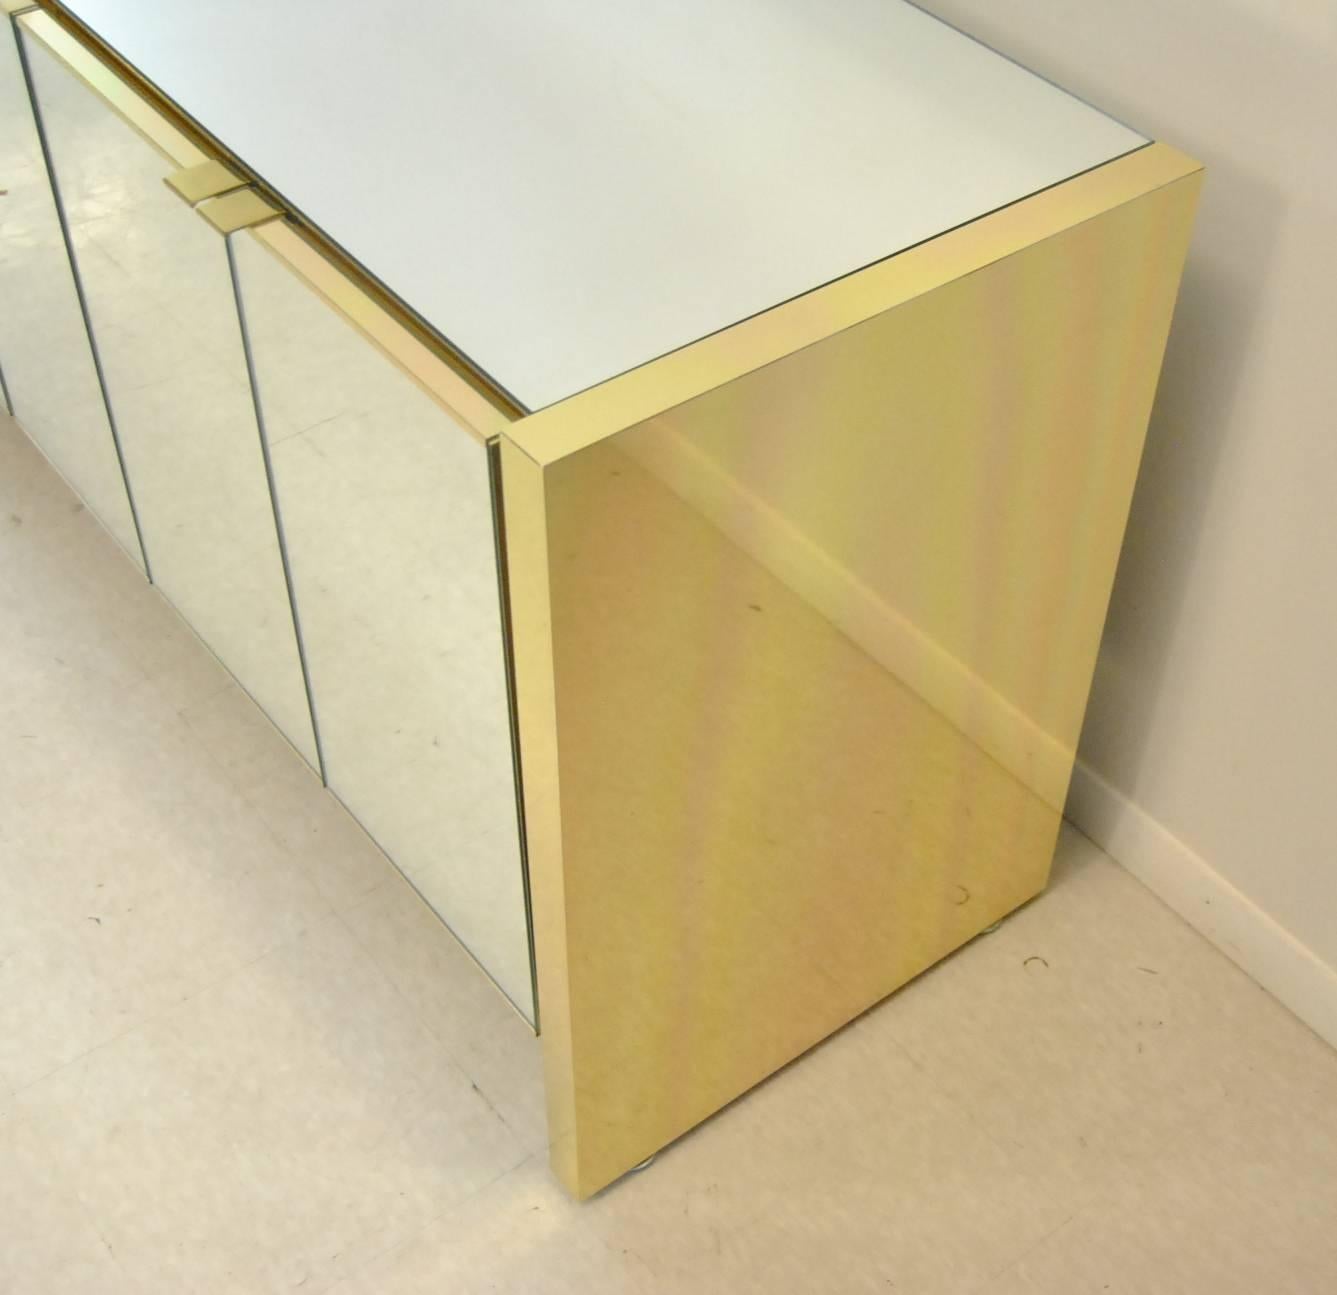 American Mid-Century Ello Mirrored and Brass Credenza Sideboard